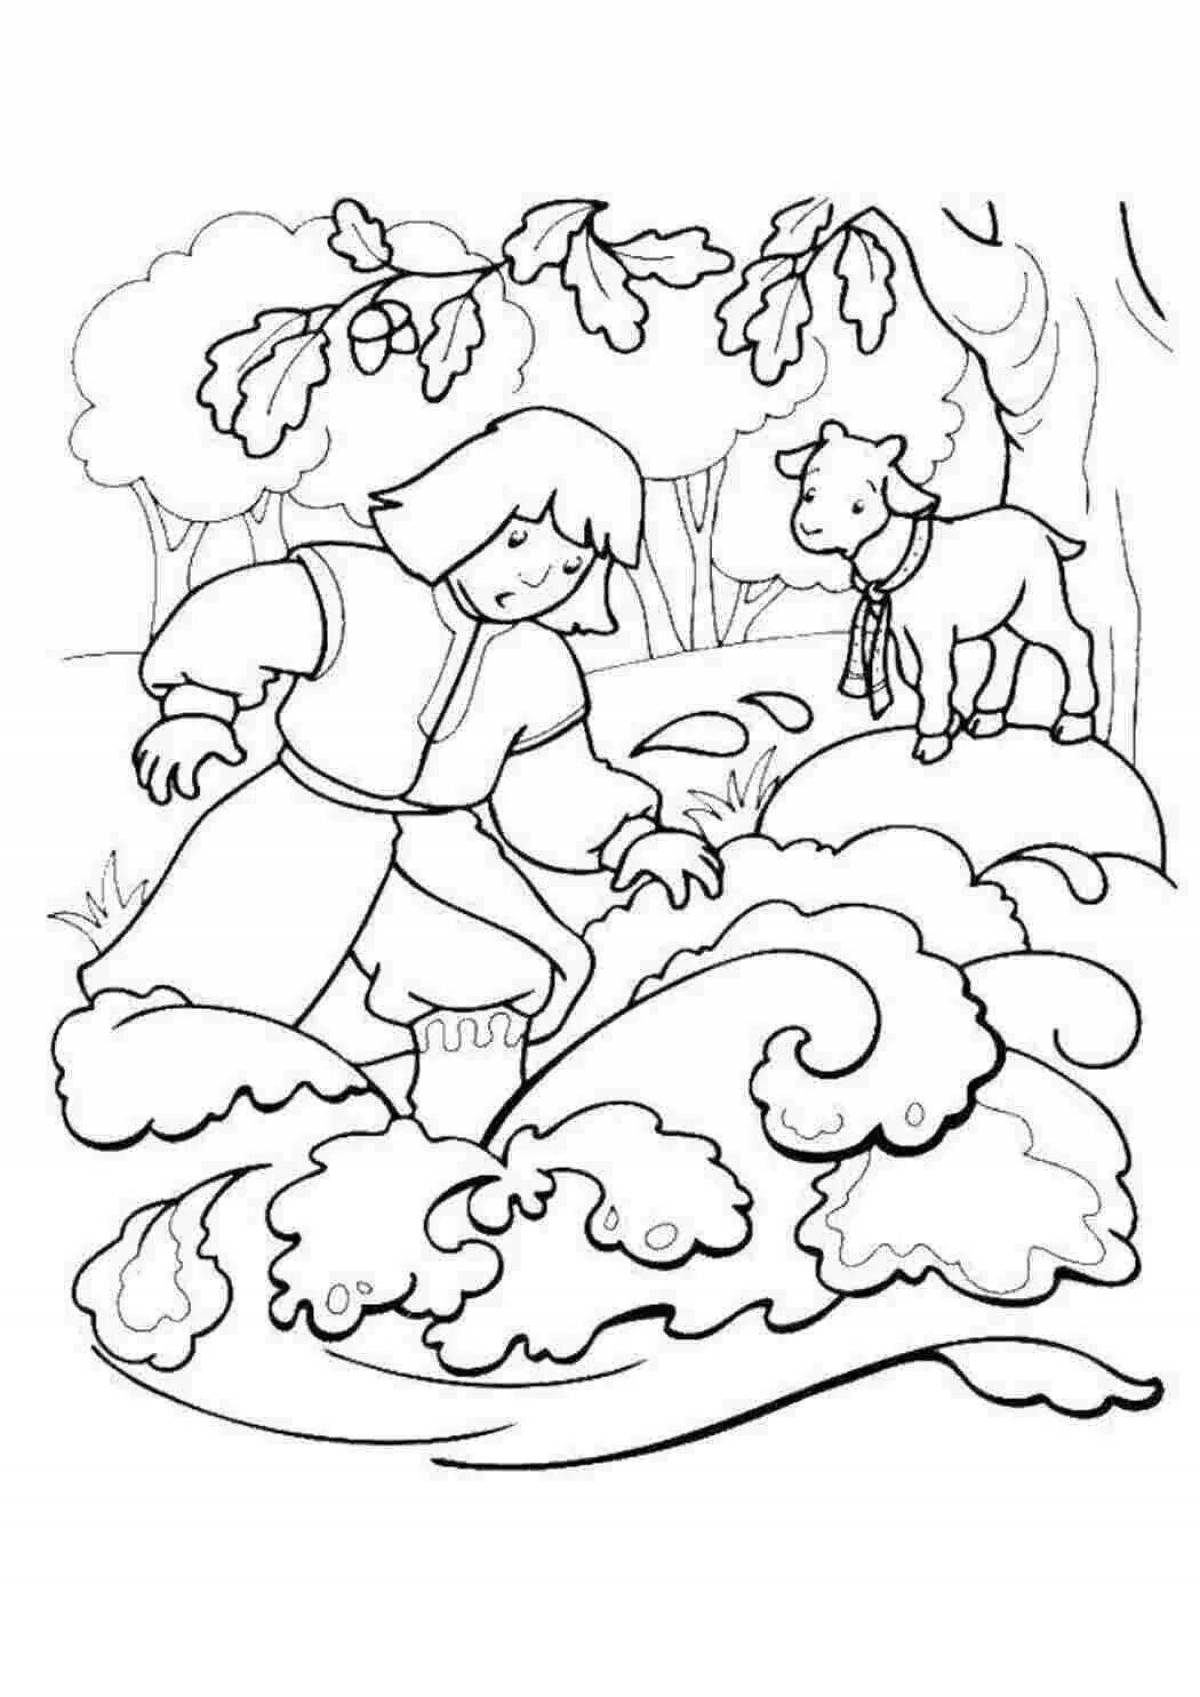 Blessed Alyonushka coloring page